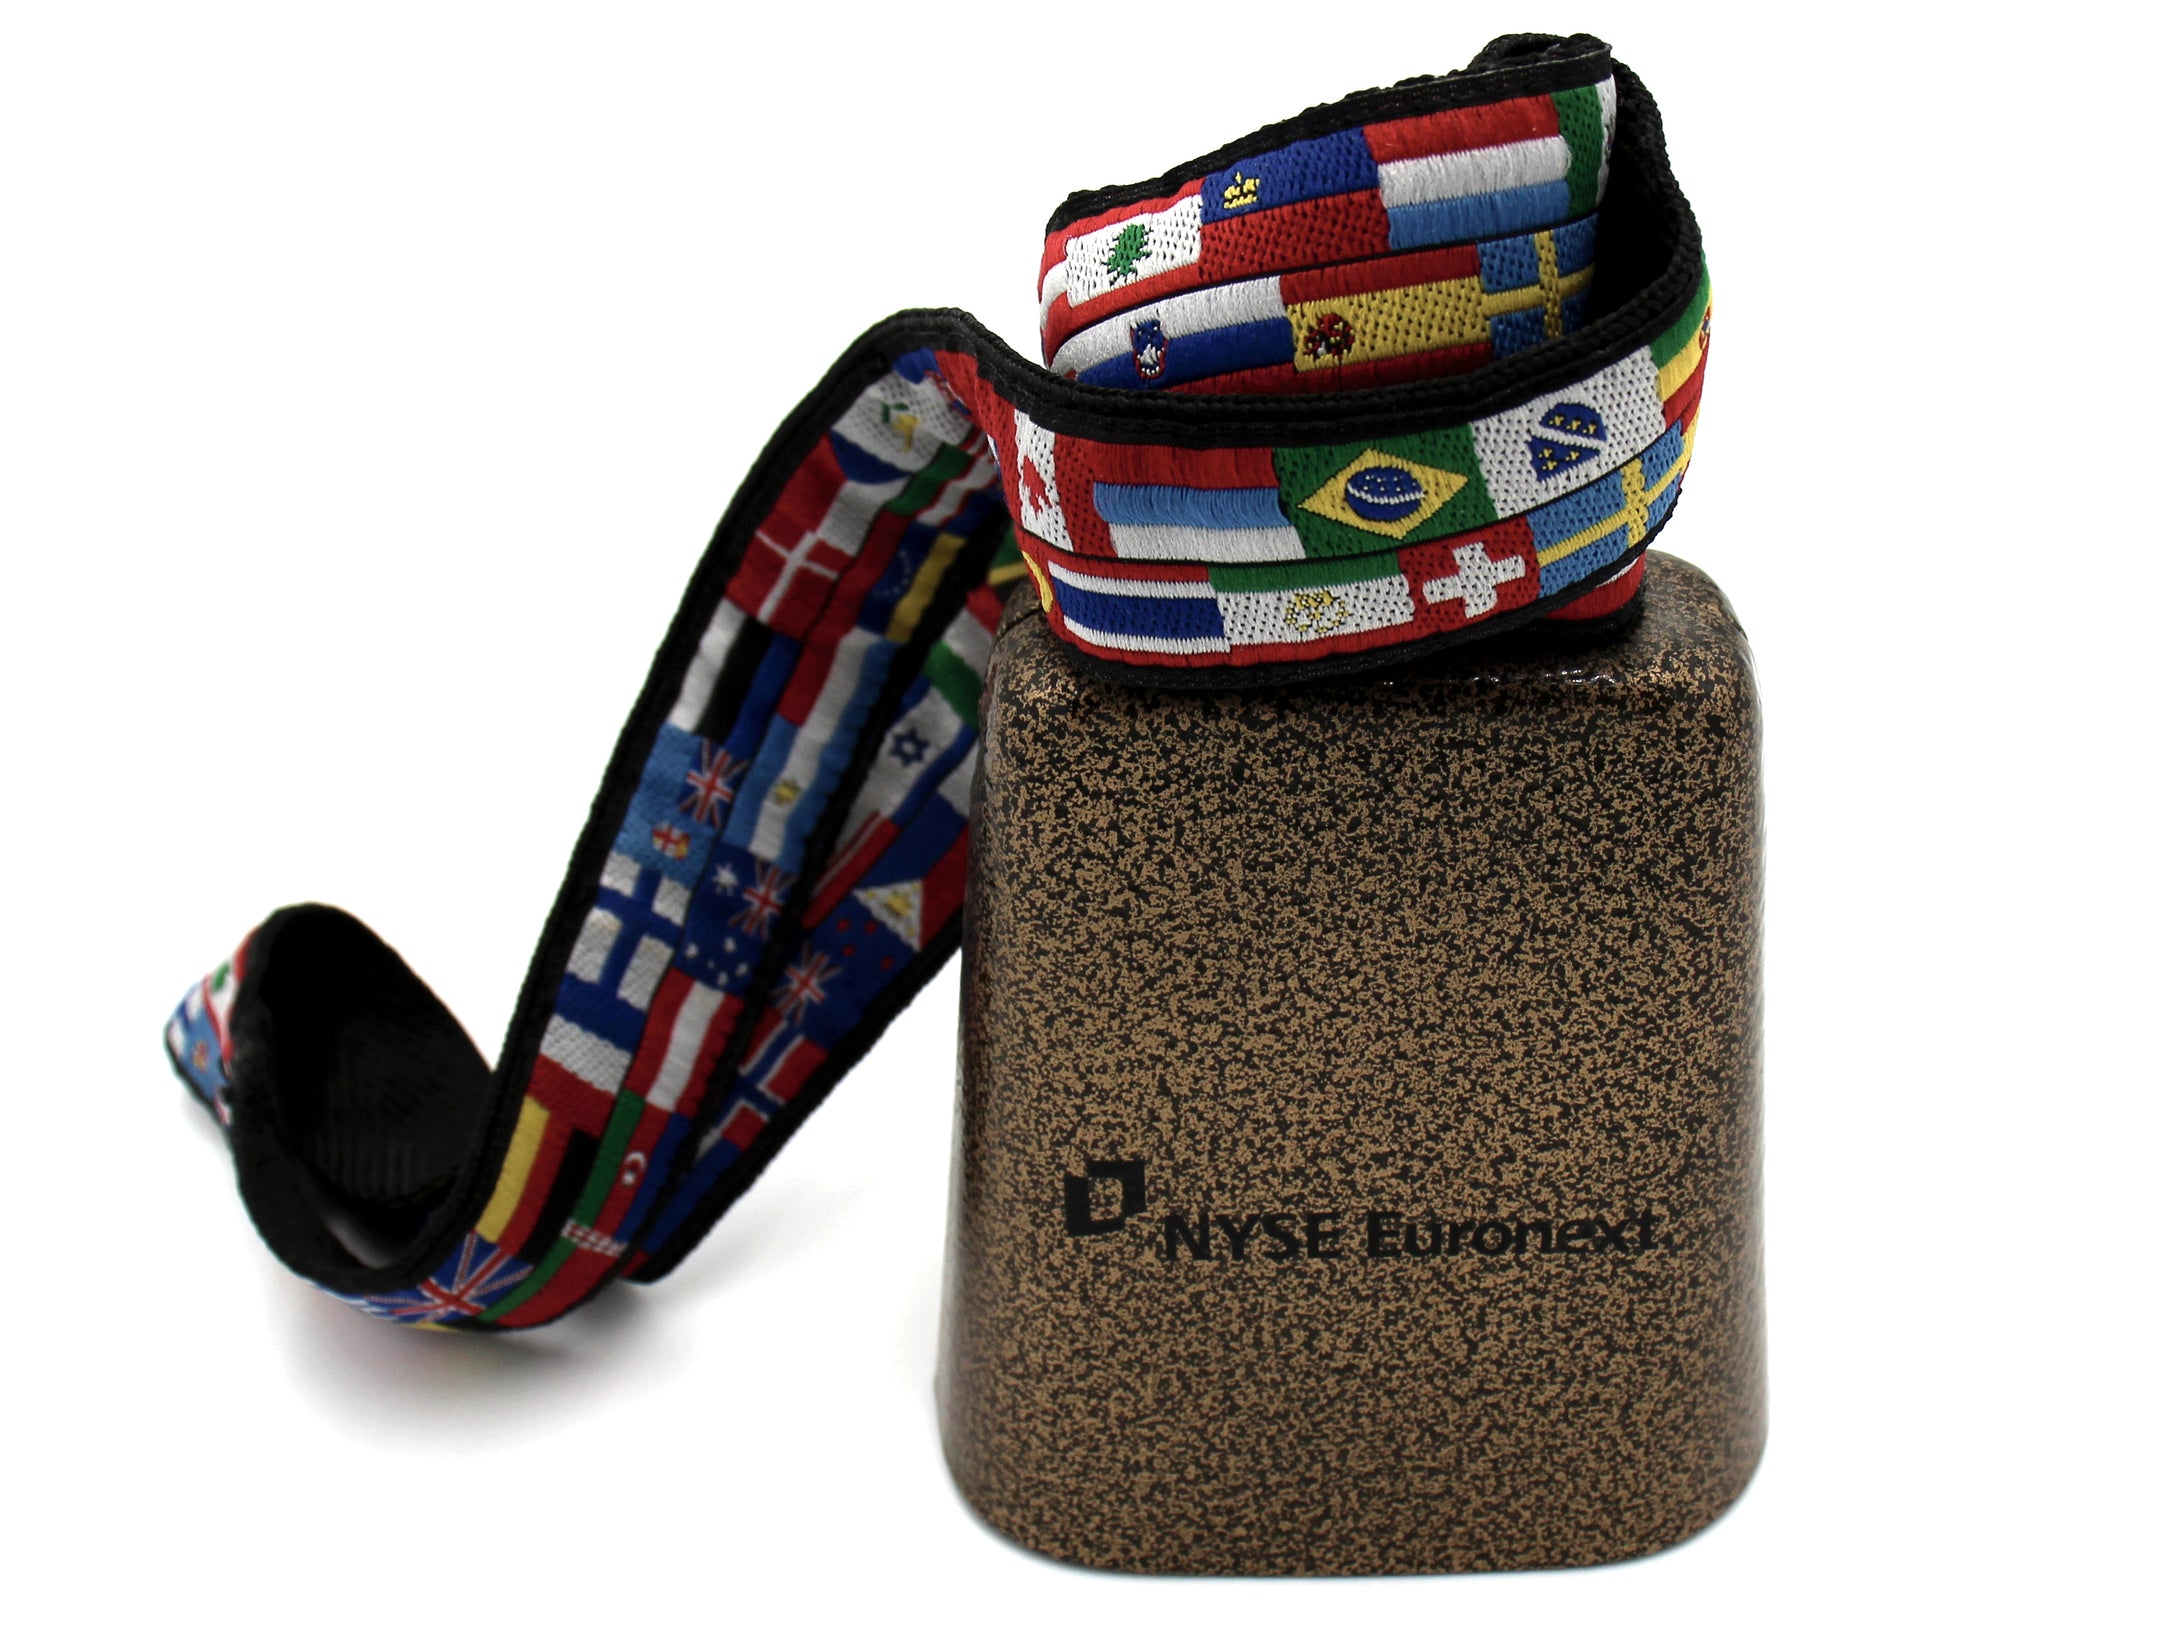 NYSE Euronext Cowbell - Wall Street Treasures